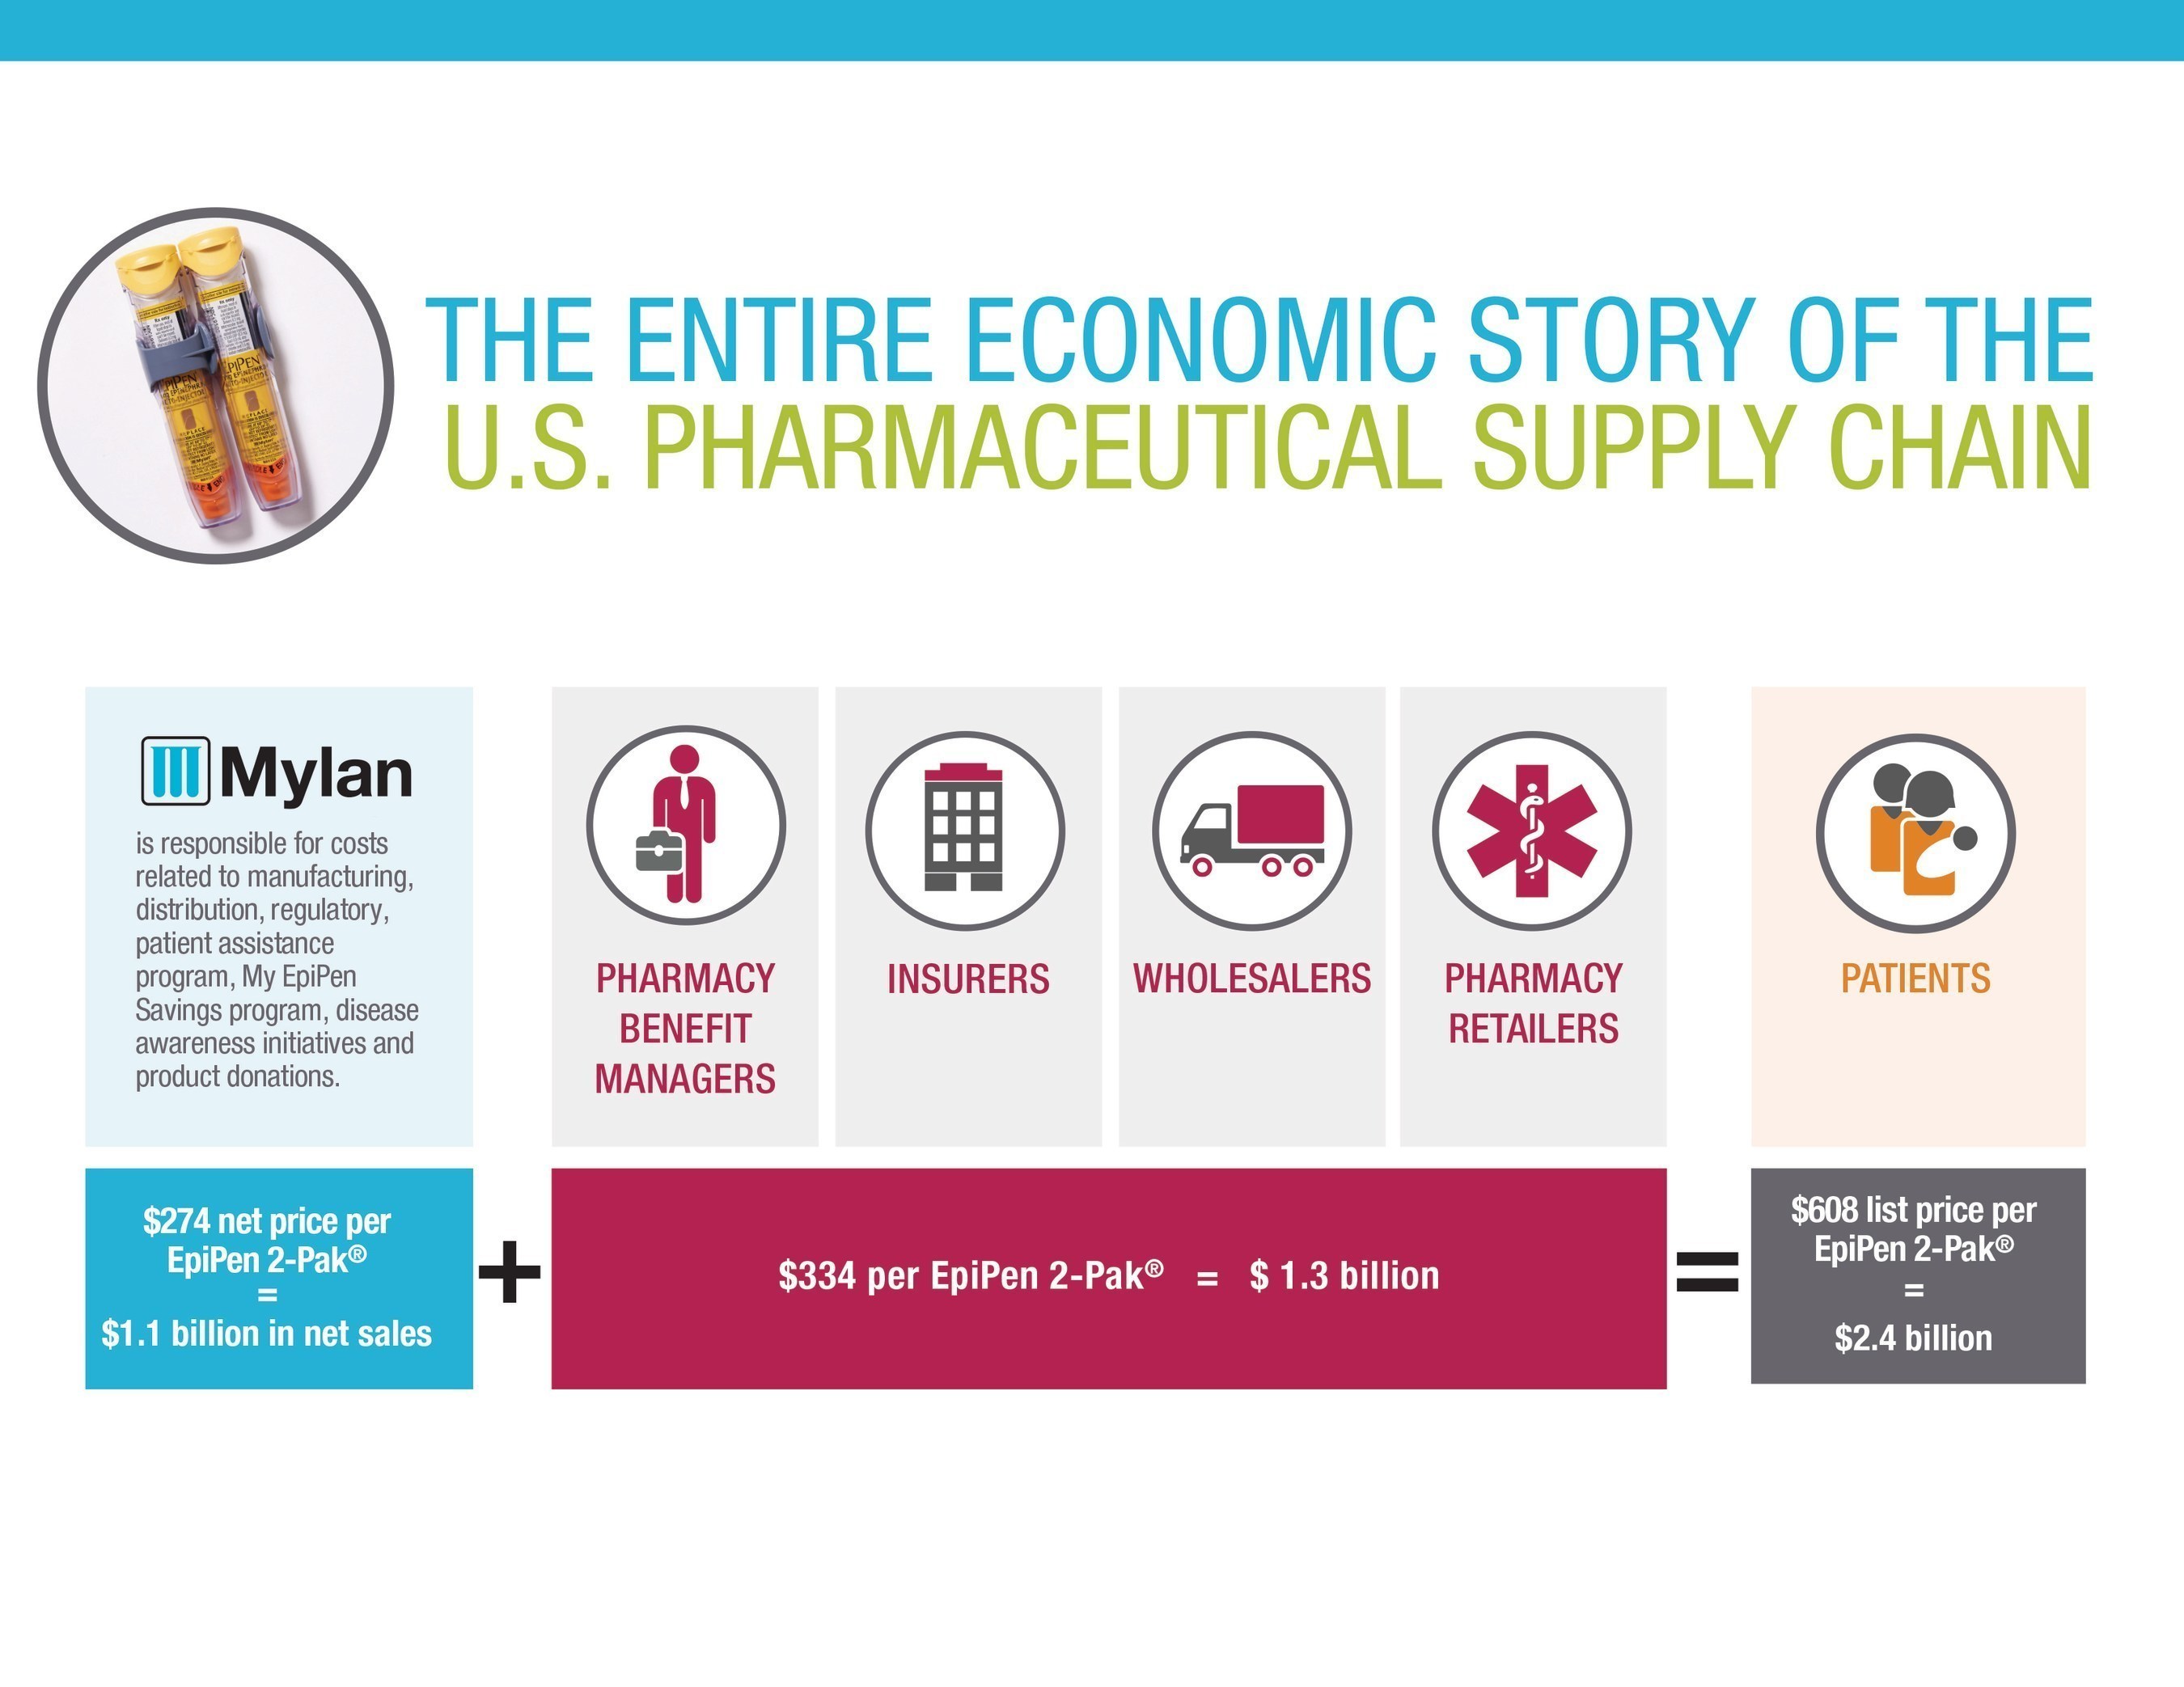 The Entire Economic Story of the U.S. Pharmaceutical Supply Chain